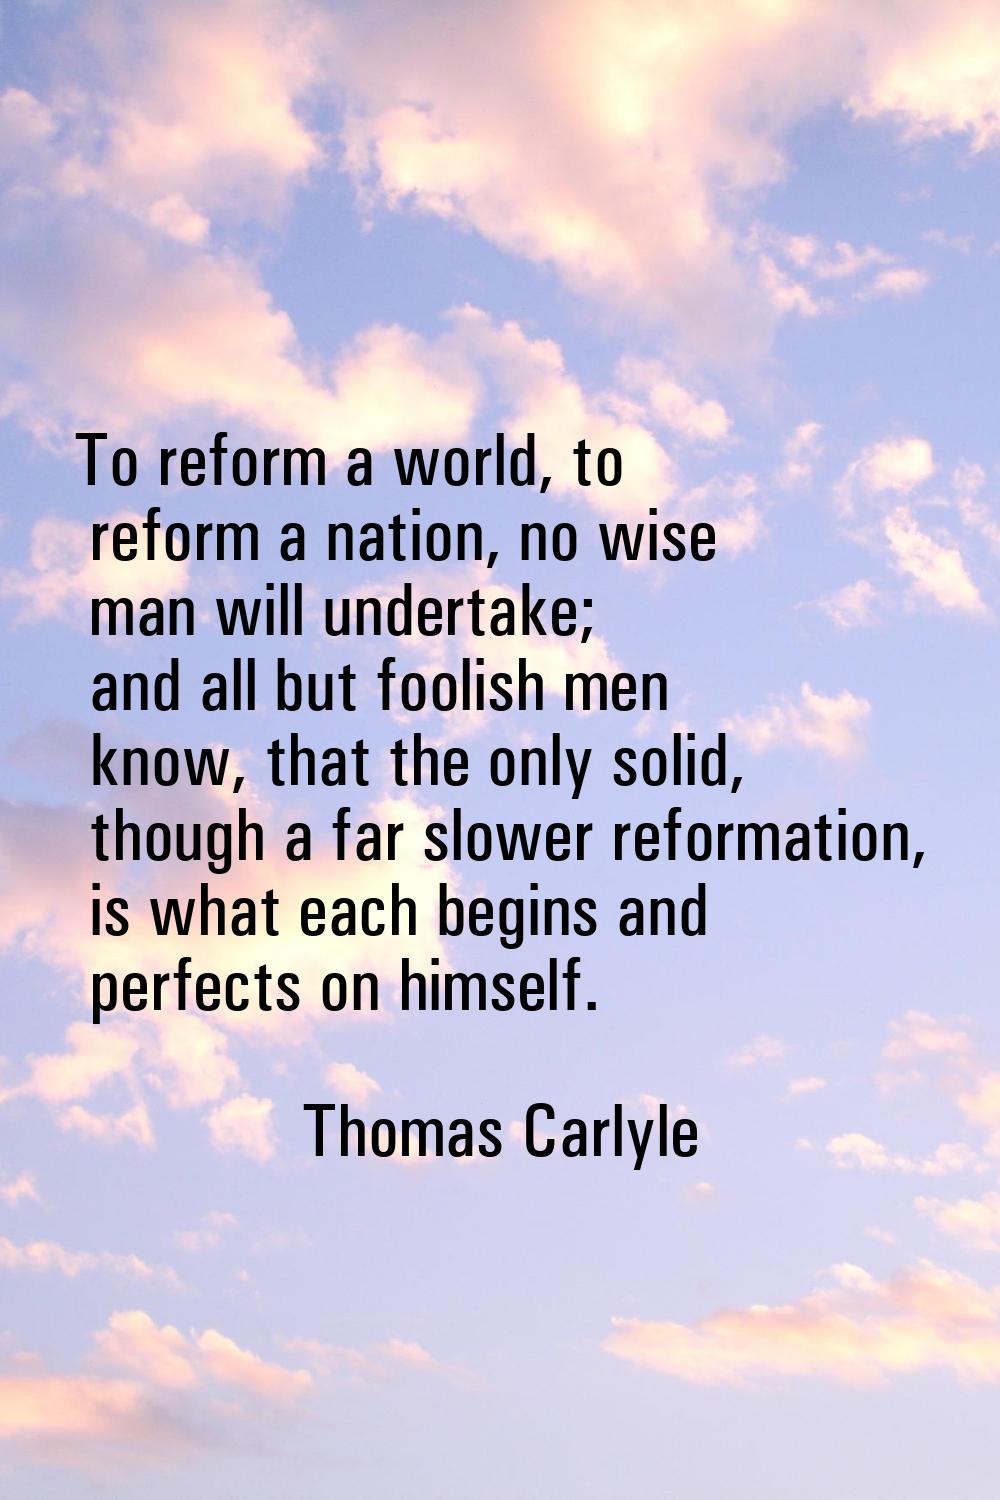 To reform a world, to reform a nation, no wise man will undertake; and all but foolish men know, th